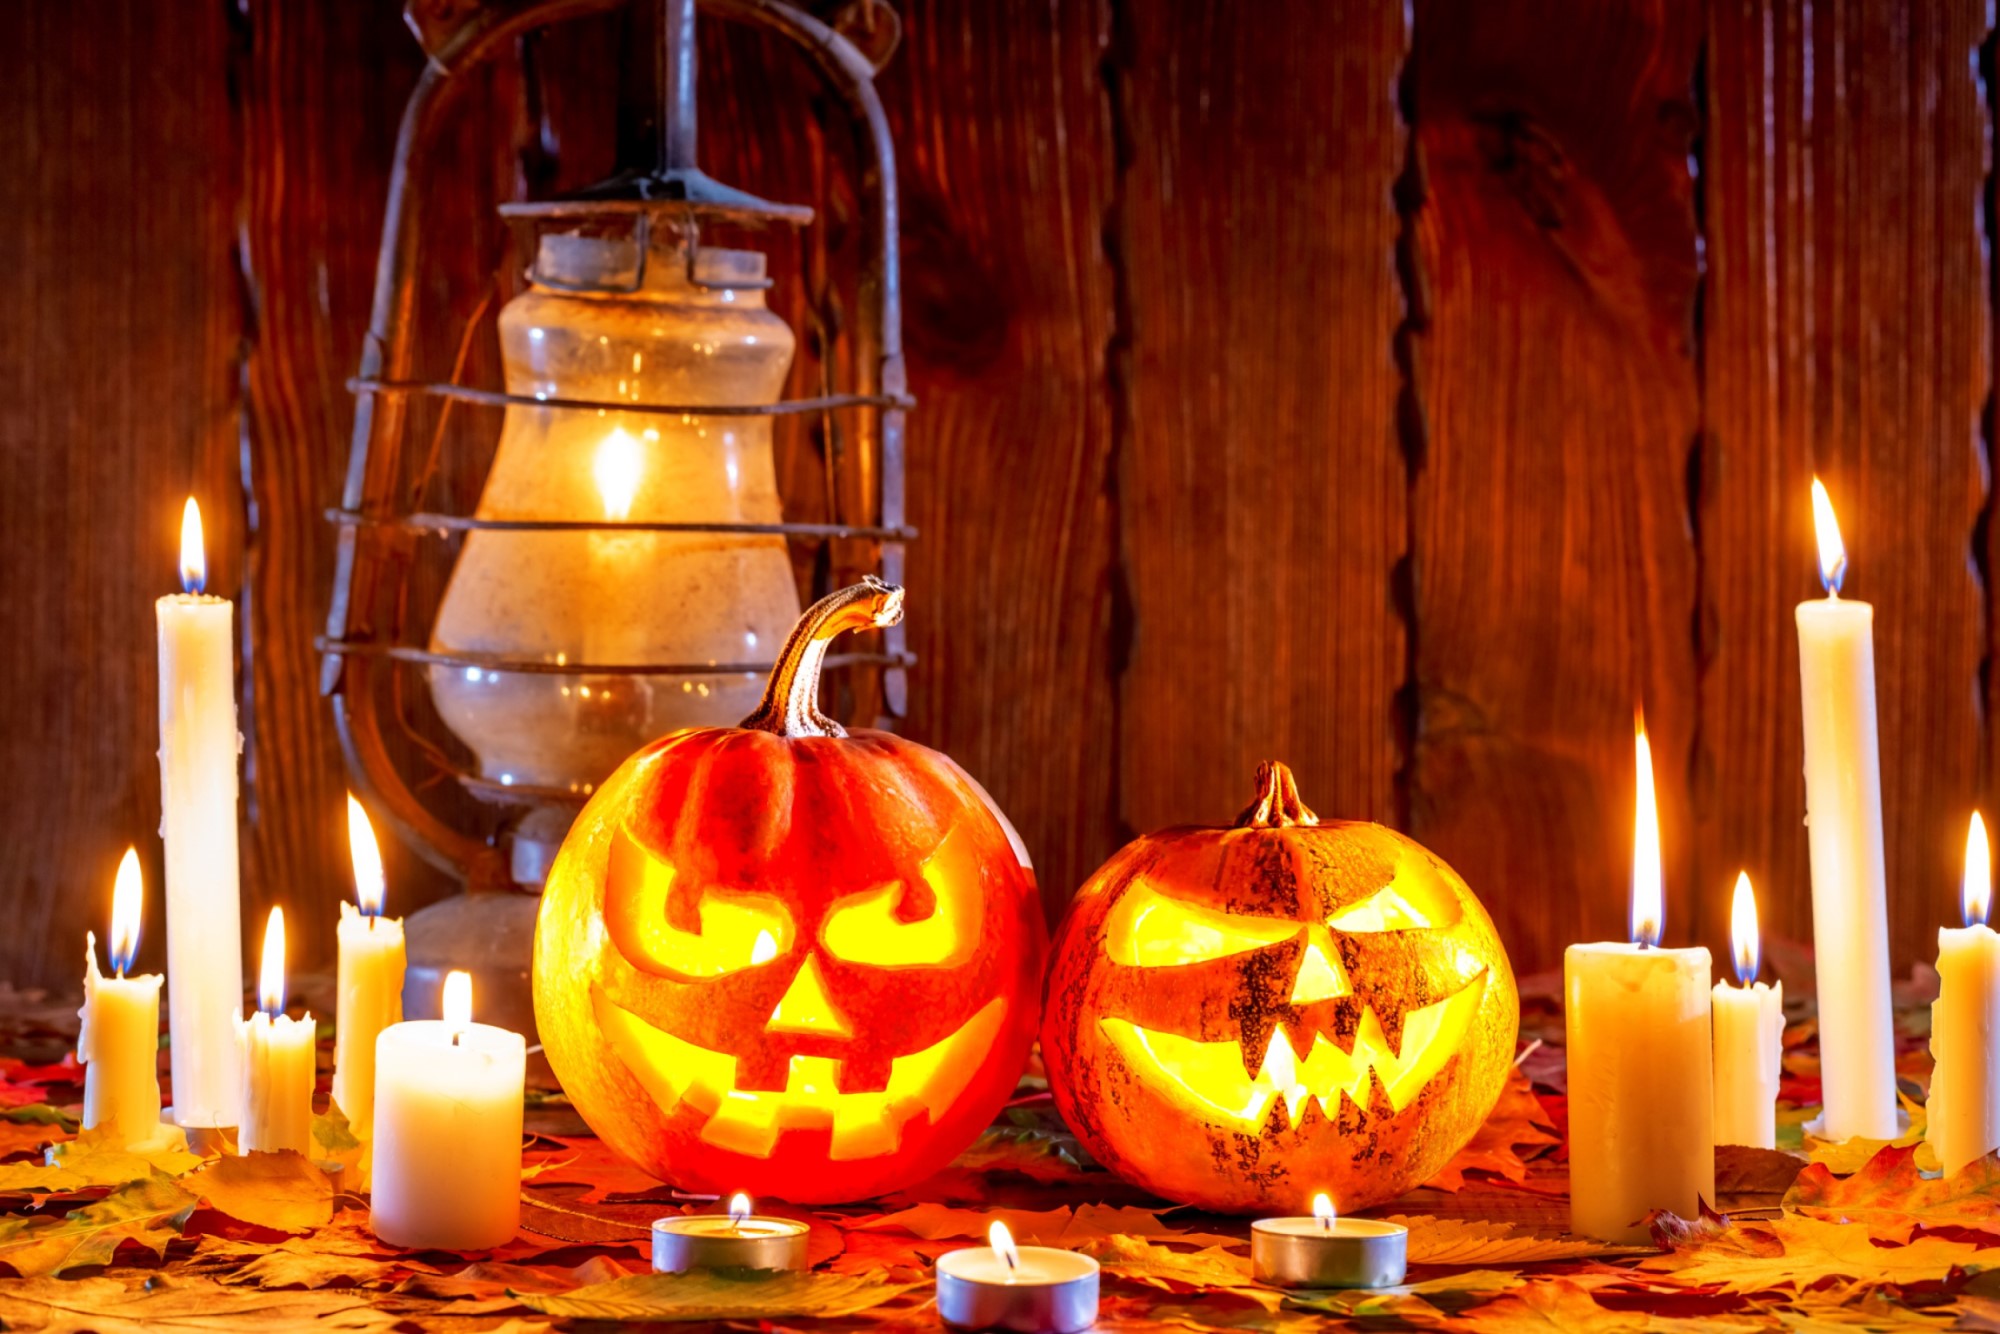 Halloween: interesting history and traditions of the holiday - UGears USA 1